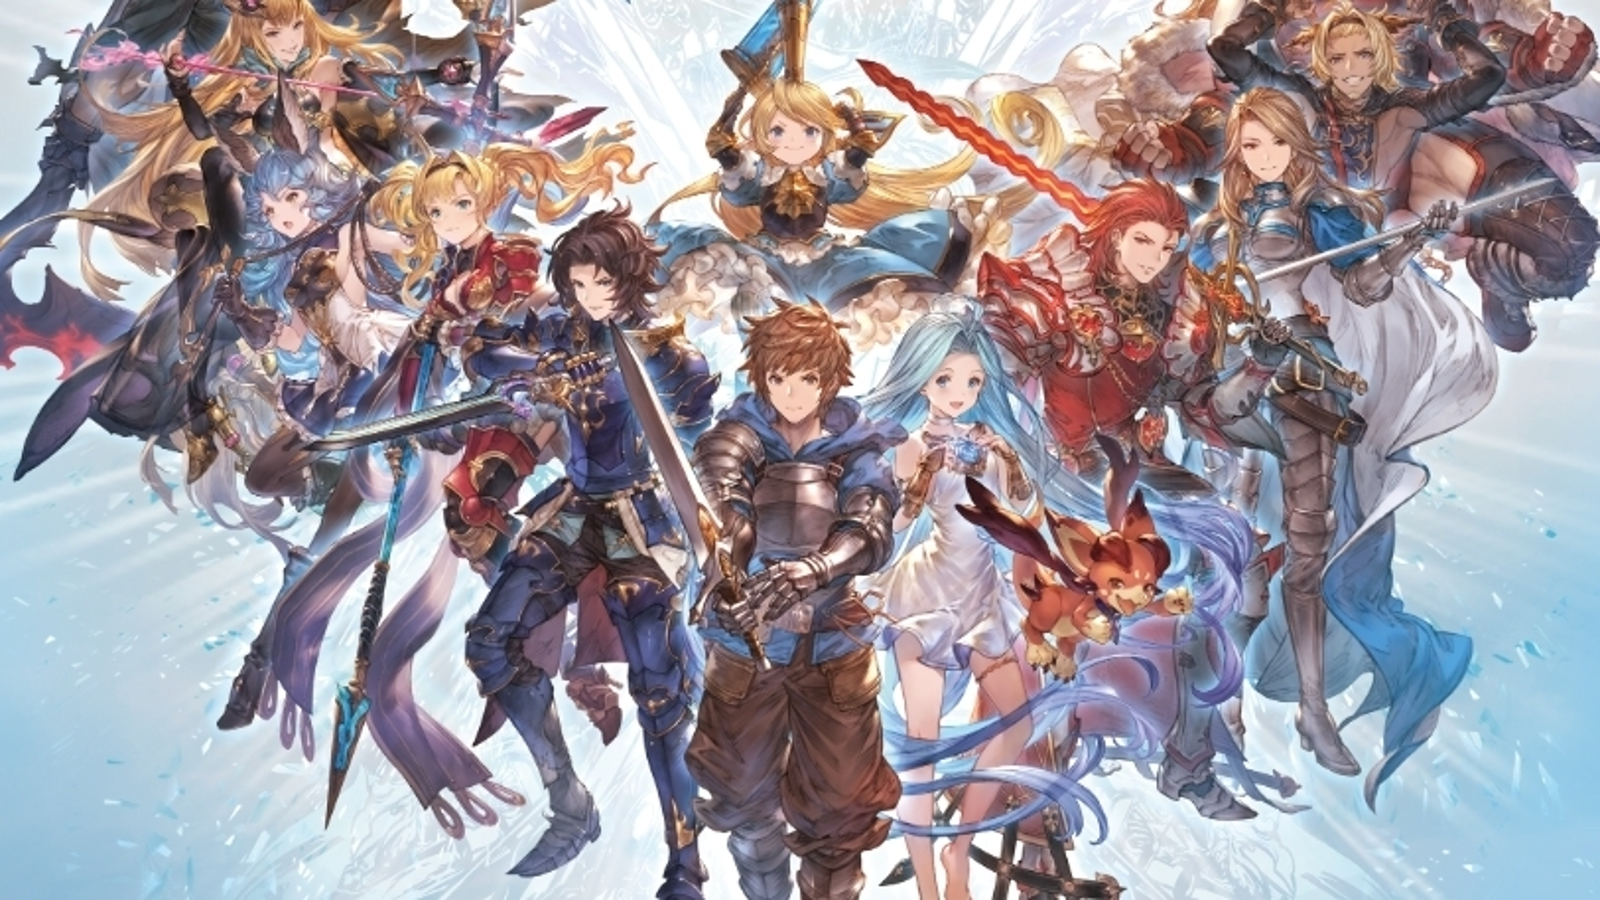  Review for Granblue Fantasy Part 1